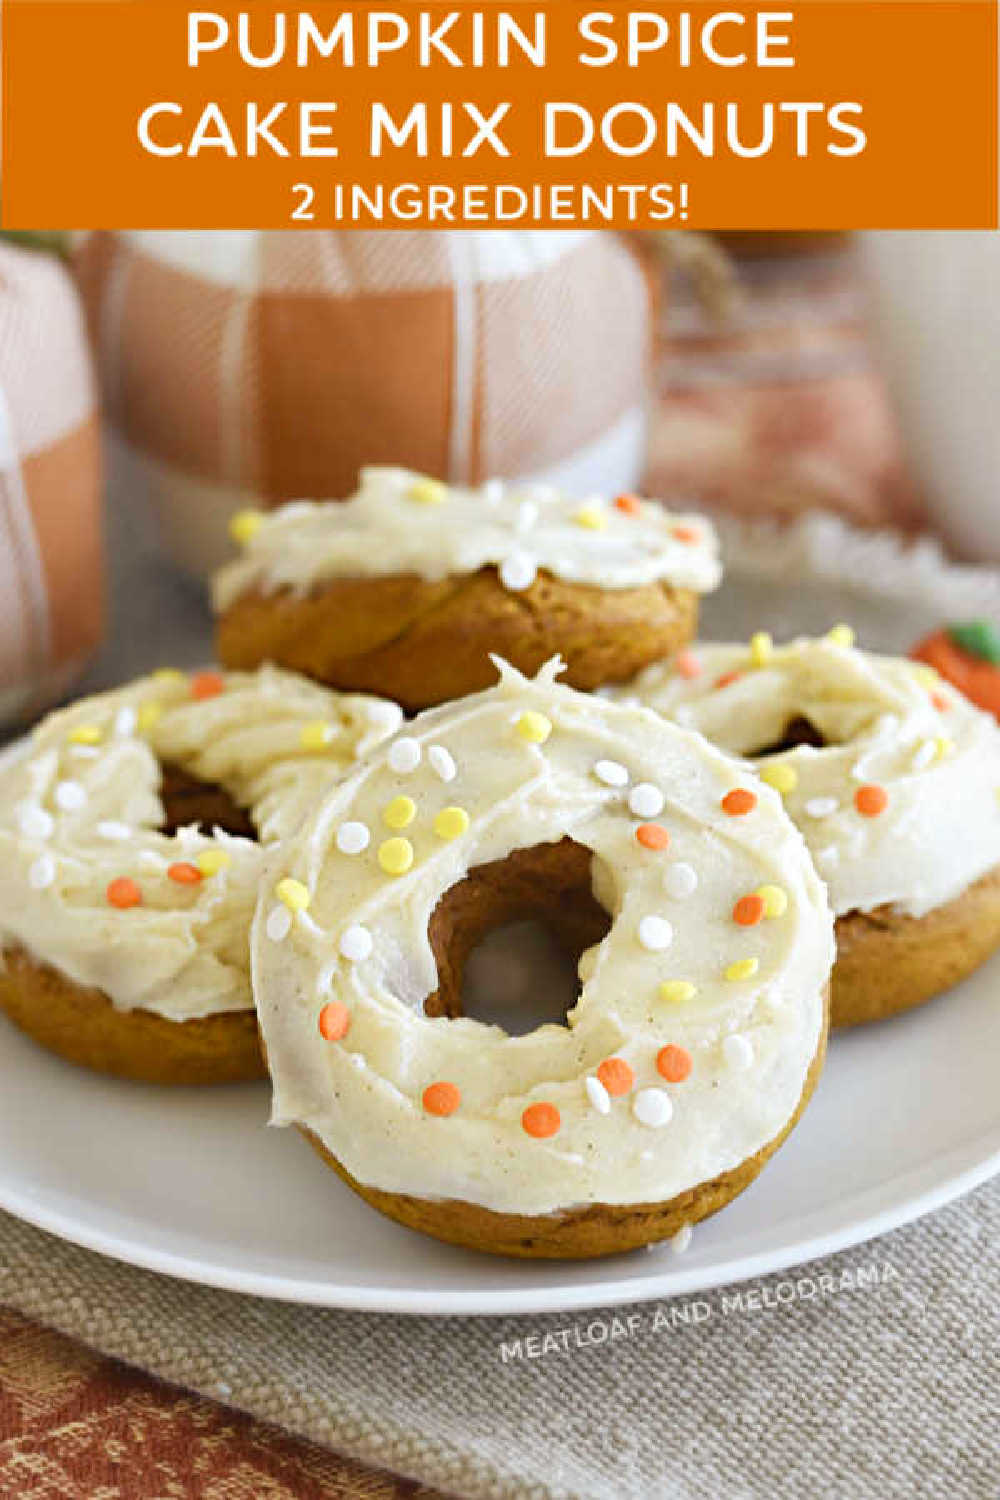 2 ingredient Pumpkin Spice Cake Mix Donuts are made with spice cake mix and pumpkin puree and topped with a delicious cream cheese frosting. This easy baked donuts recipe is perfect for fall!  via @meamel